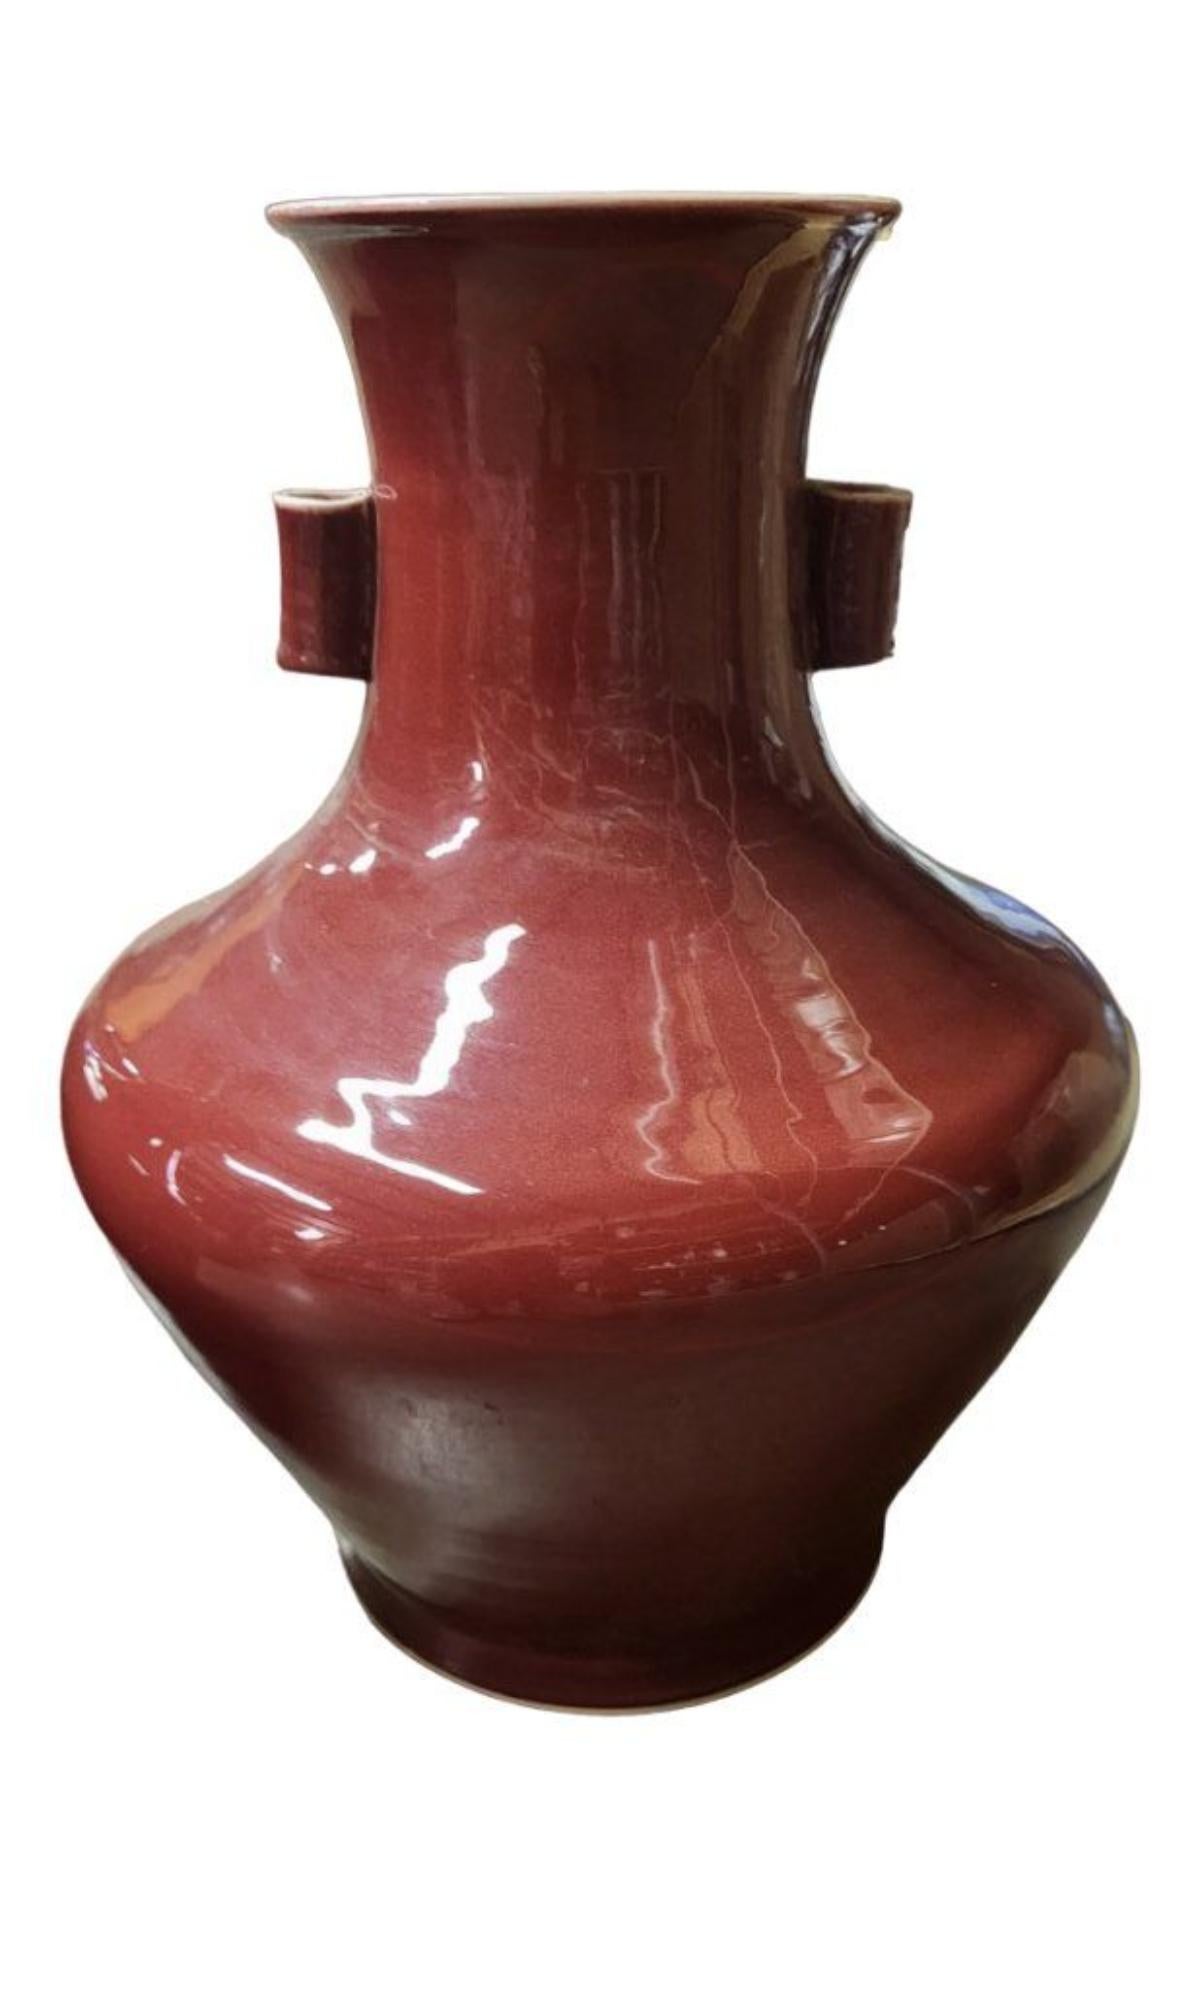 Pair of Large Oxblood Chinese Porcelain Vases with Handles In Good Condition For Sale In Newmanstown, PA